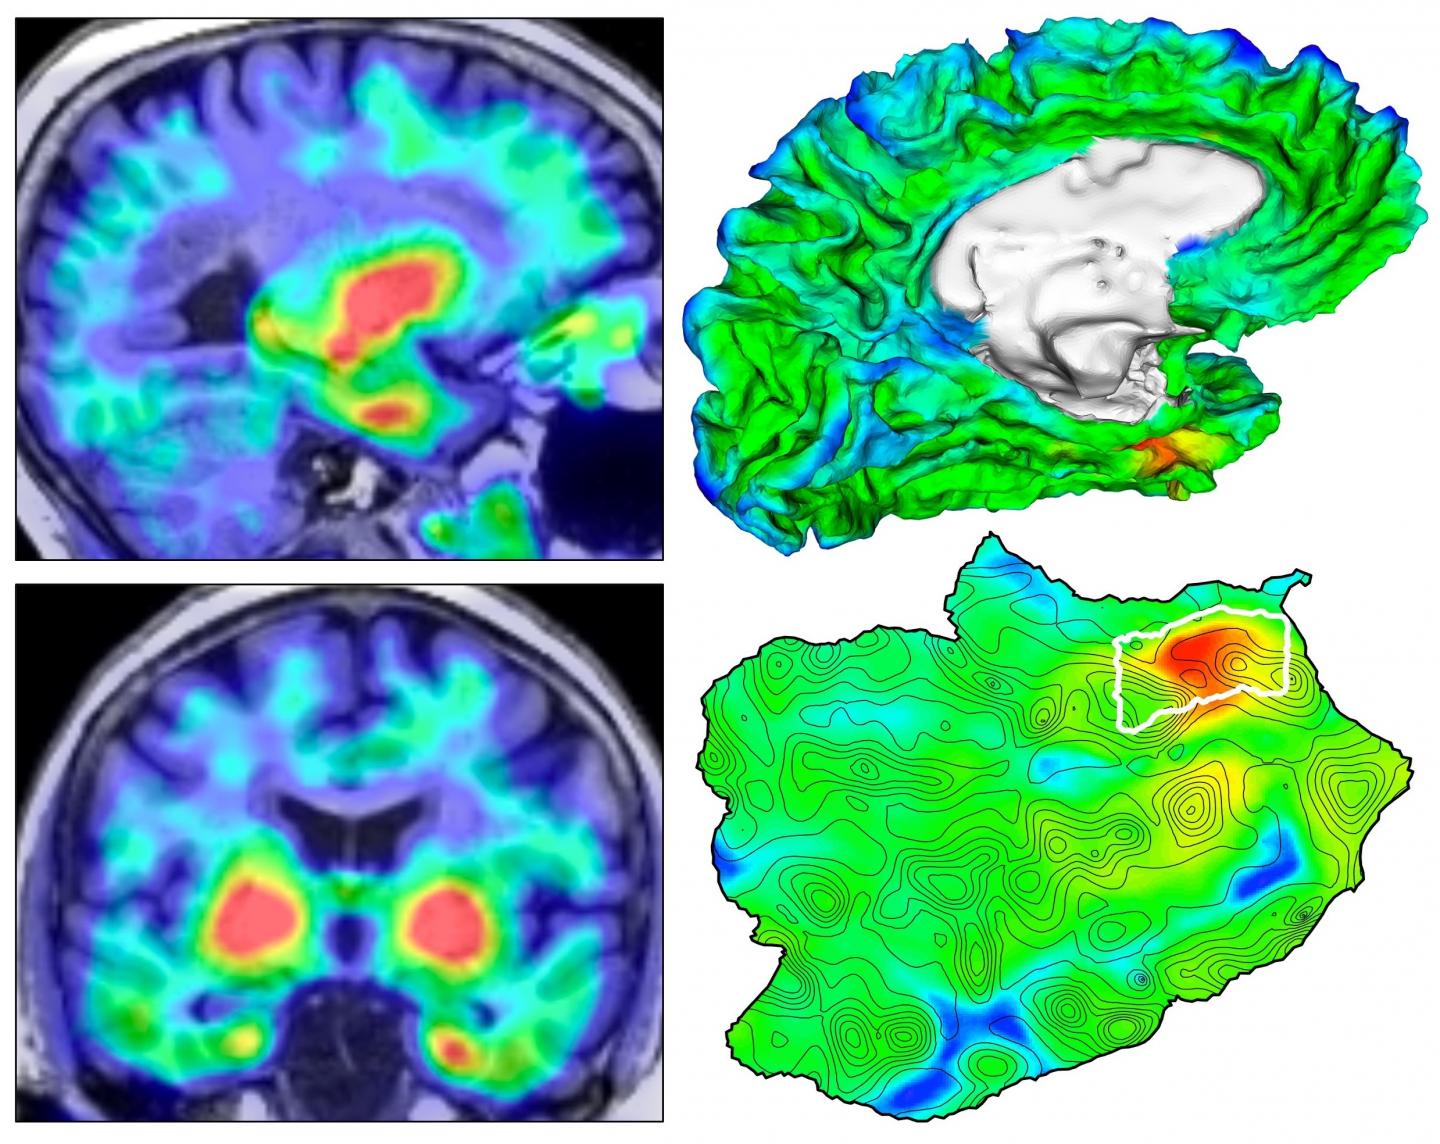 Automated Imaging Reveals Where TAU Protein Originates in the Brain in Alzheimer's Disease (1 of 3)